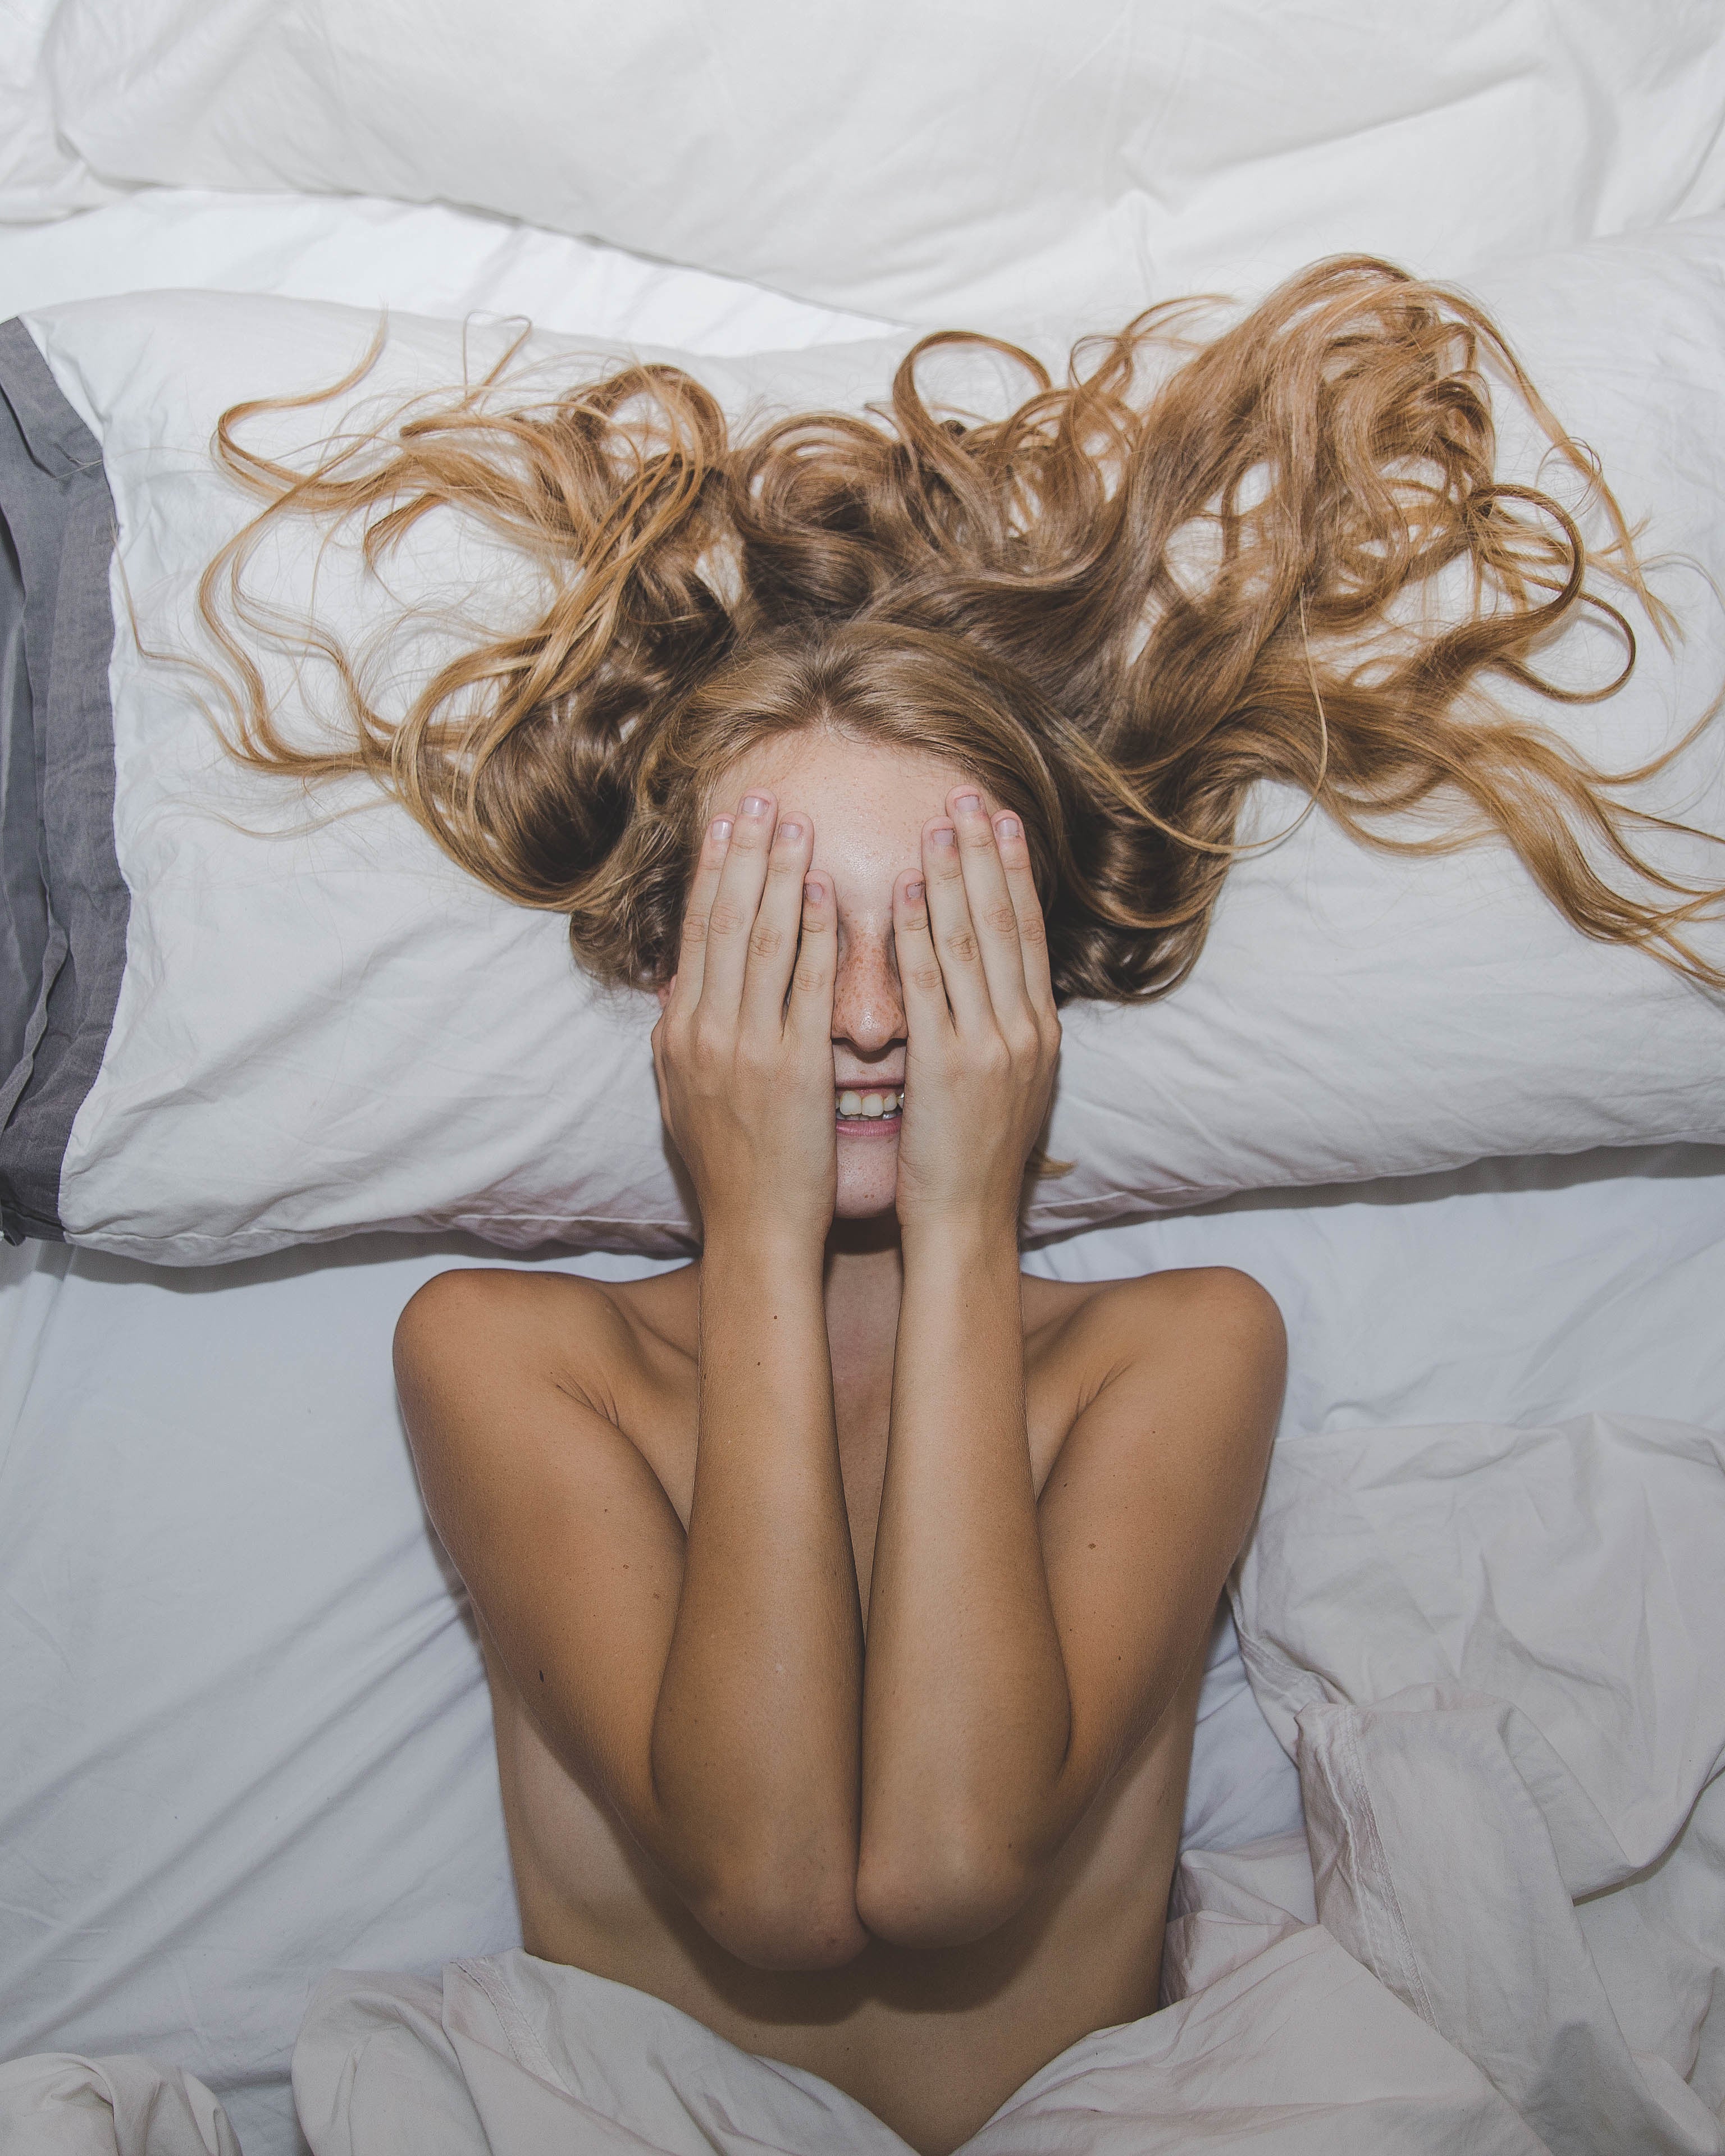 Young woman with blonde hair waking up